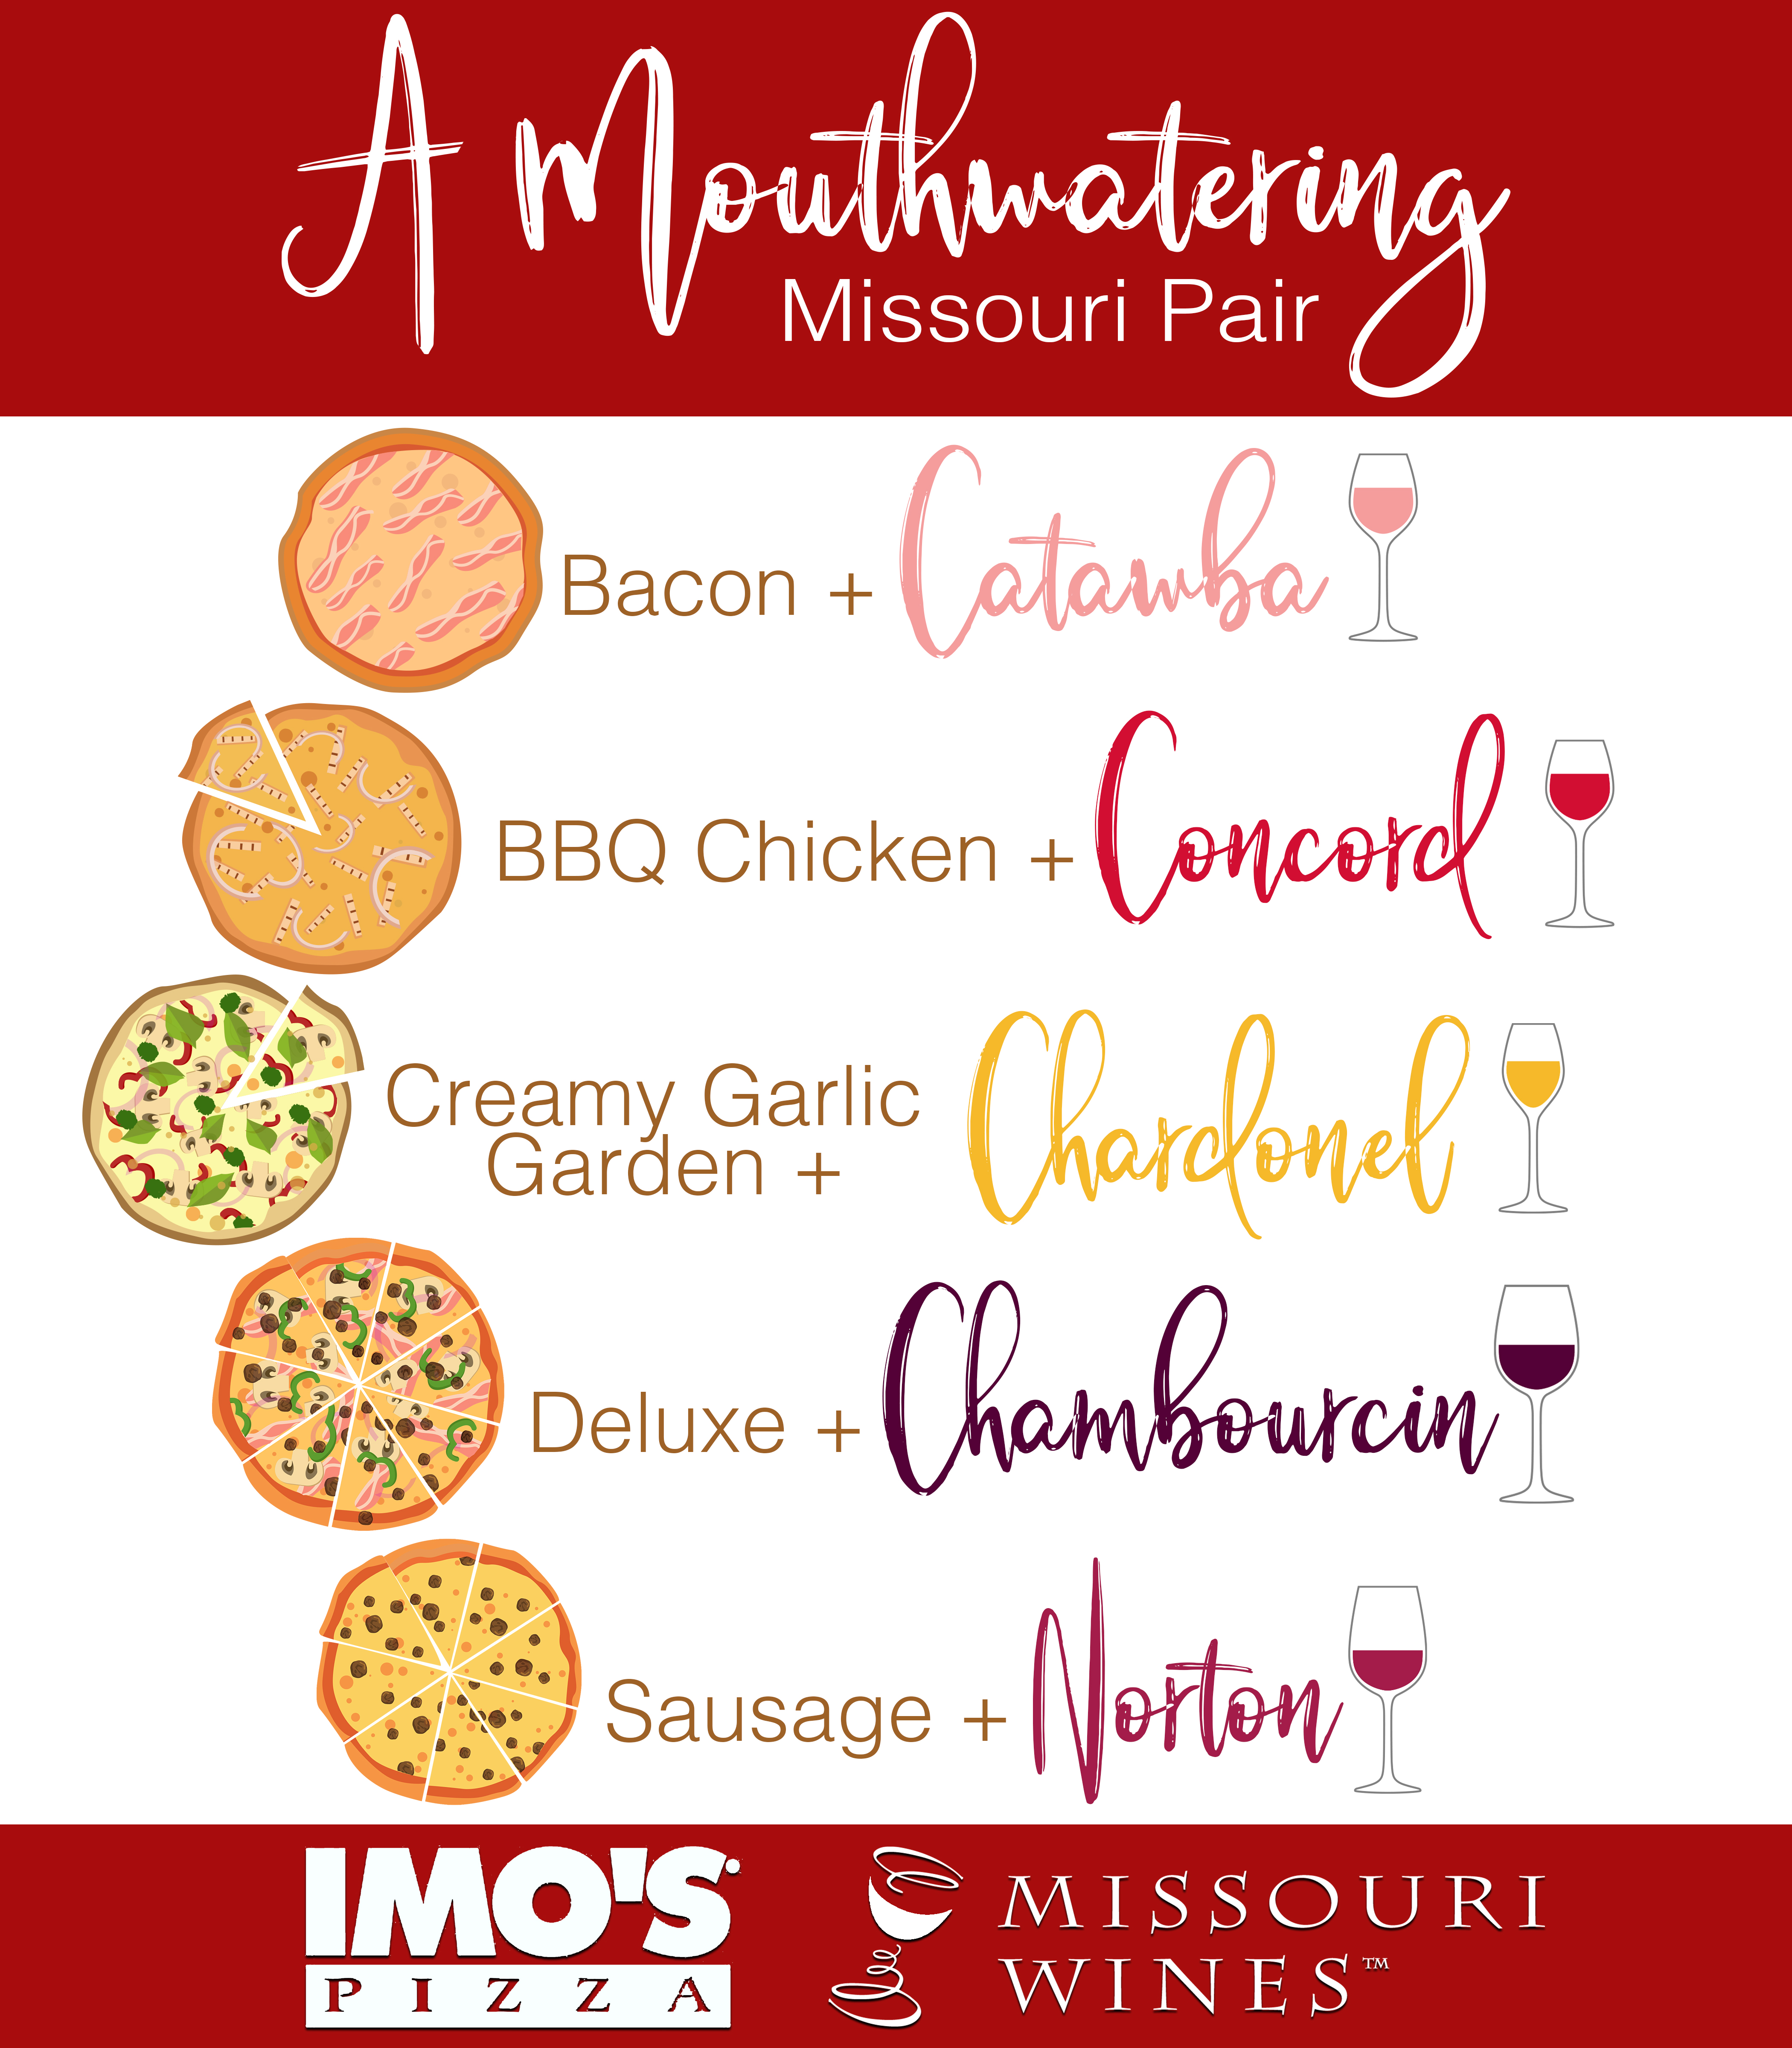 IMO's Pizza and MO Wine